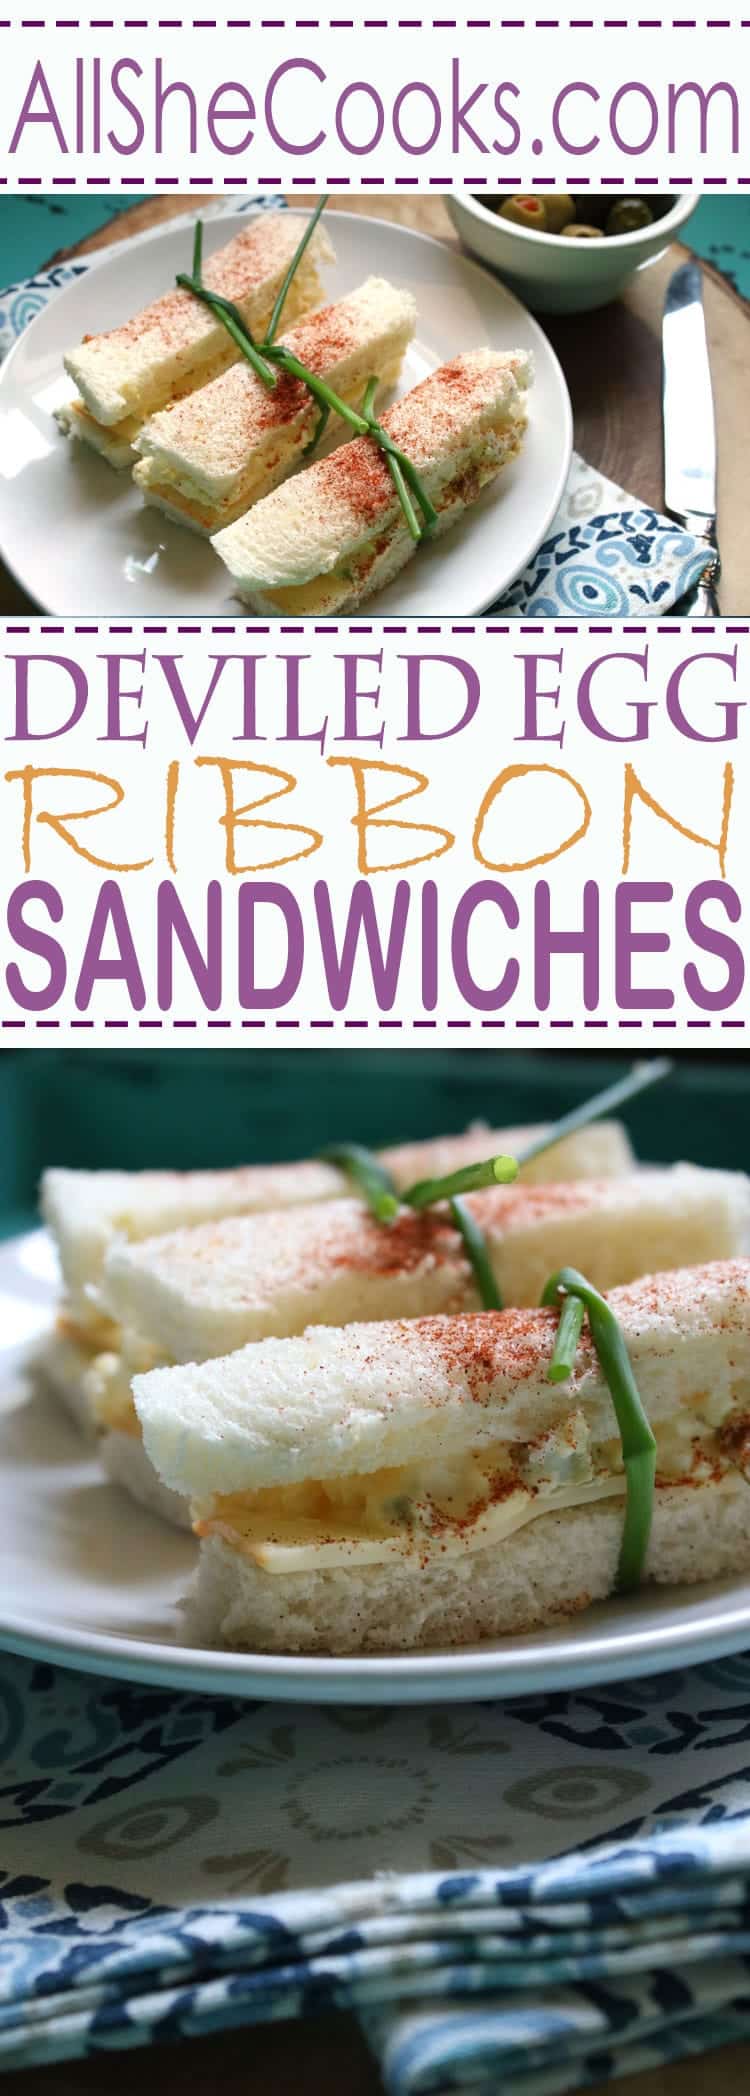 Deviled Egg Ribbon Sandwiches and a fun way to enjoy egg salad sandwiches made into fancy finger sandwiches. With the added taste of cheese, you will want to try these tasty sandwiches.